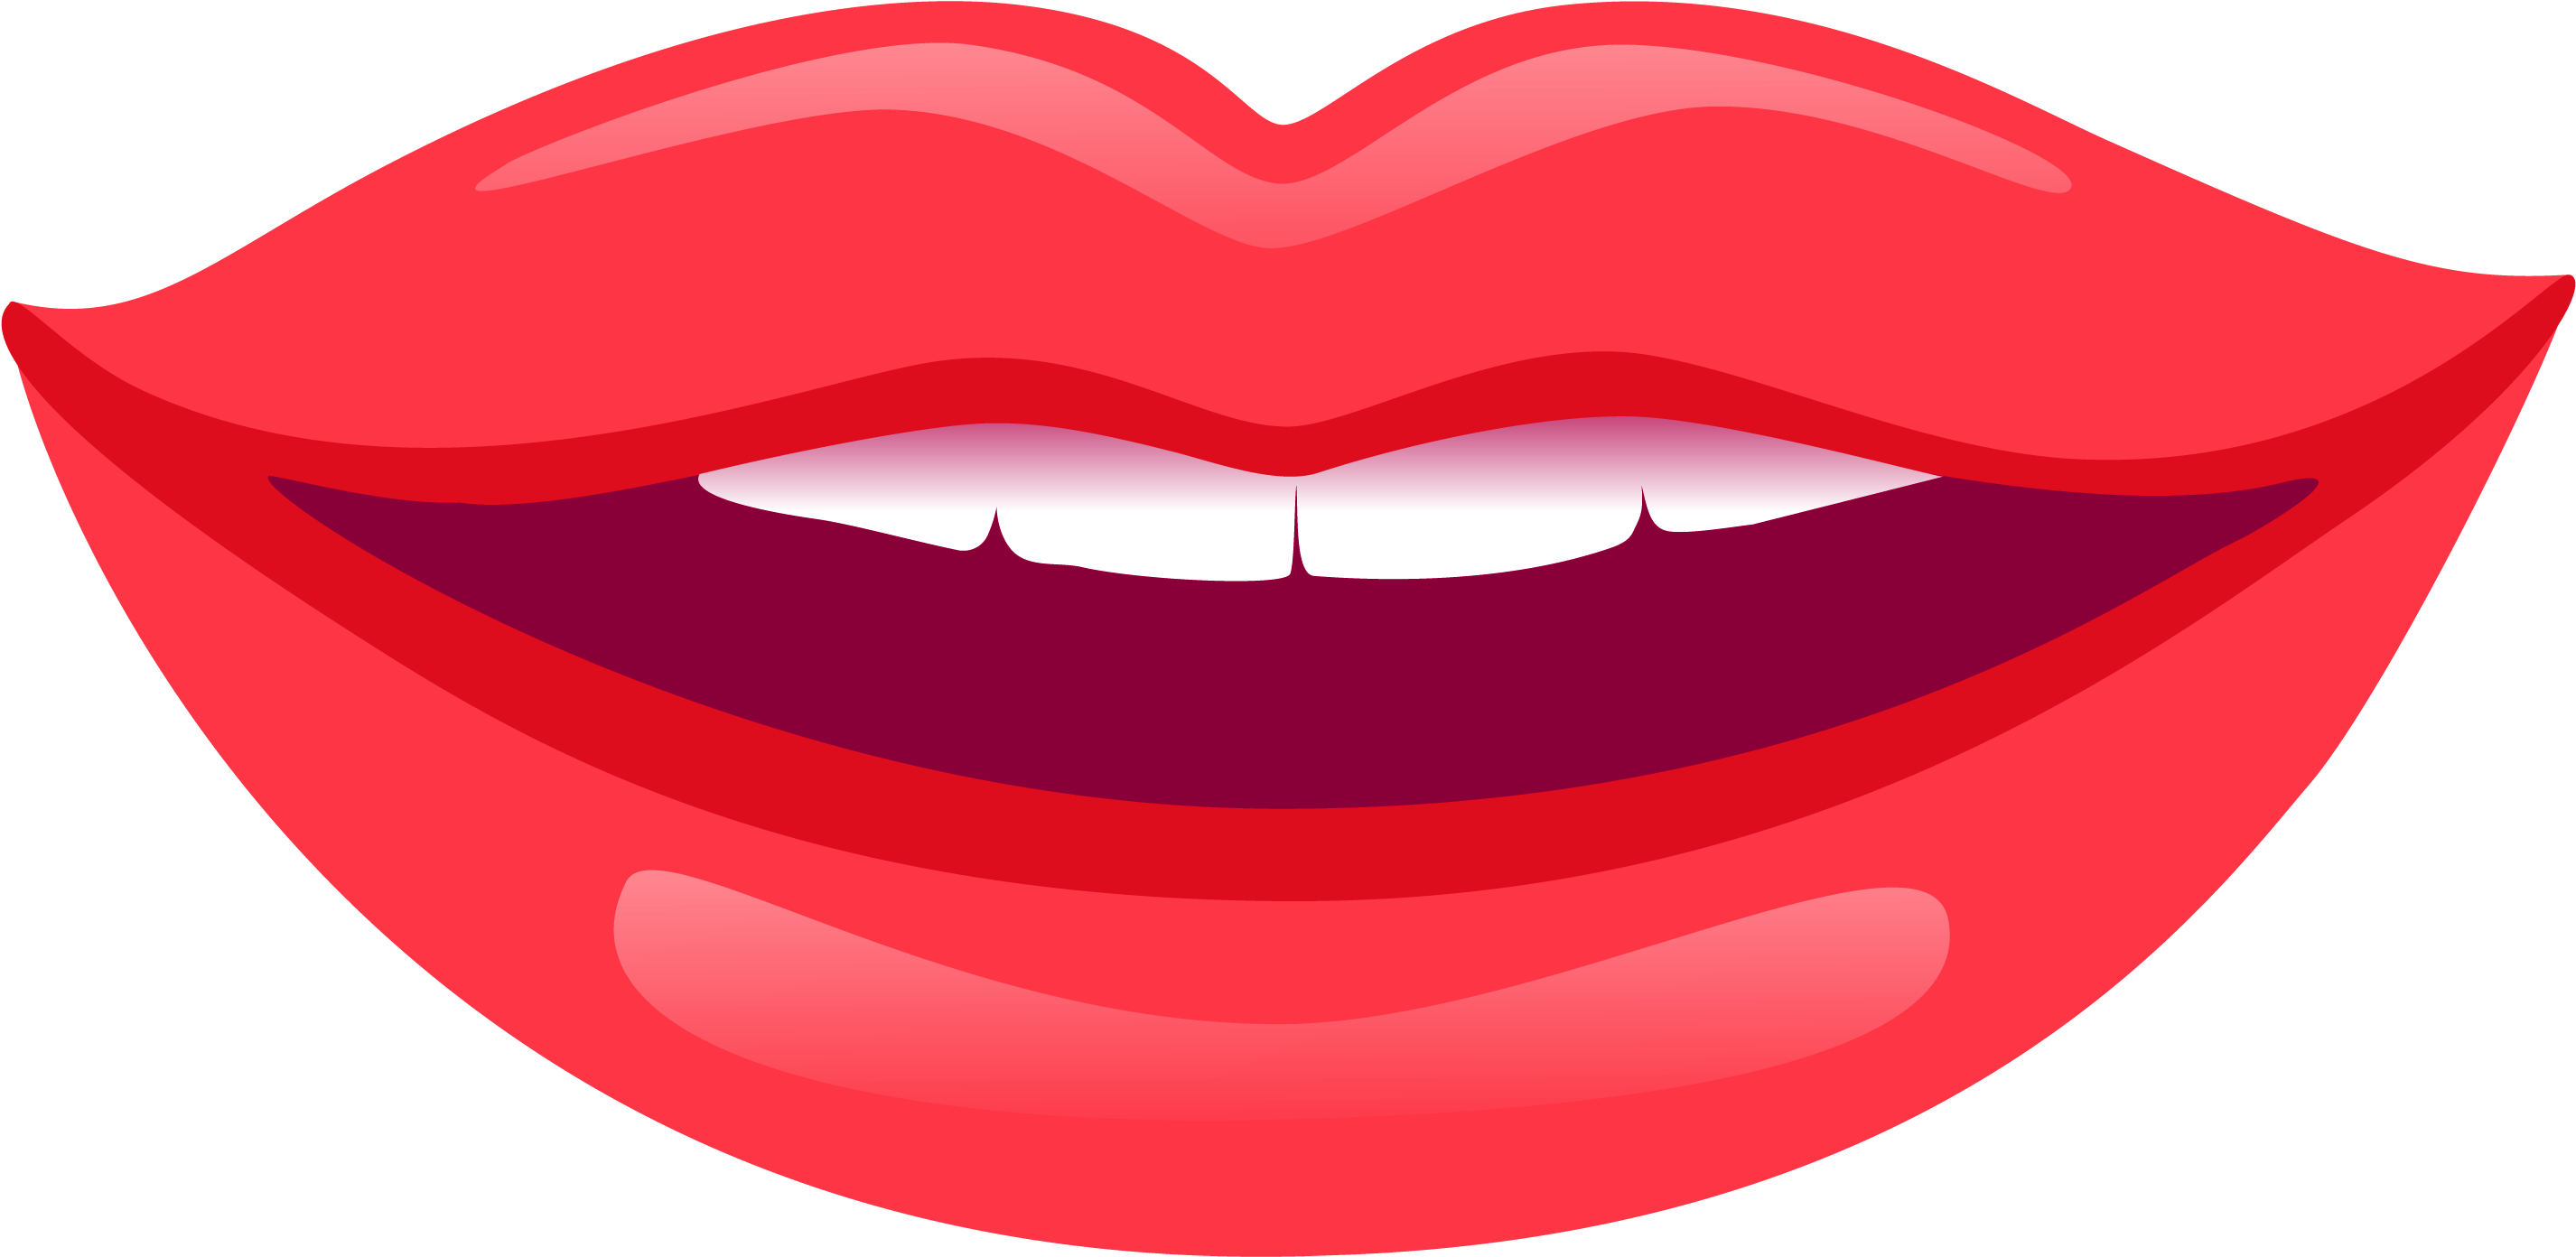 Red Lipstick Smiling Mouth Illustration